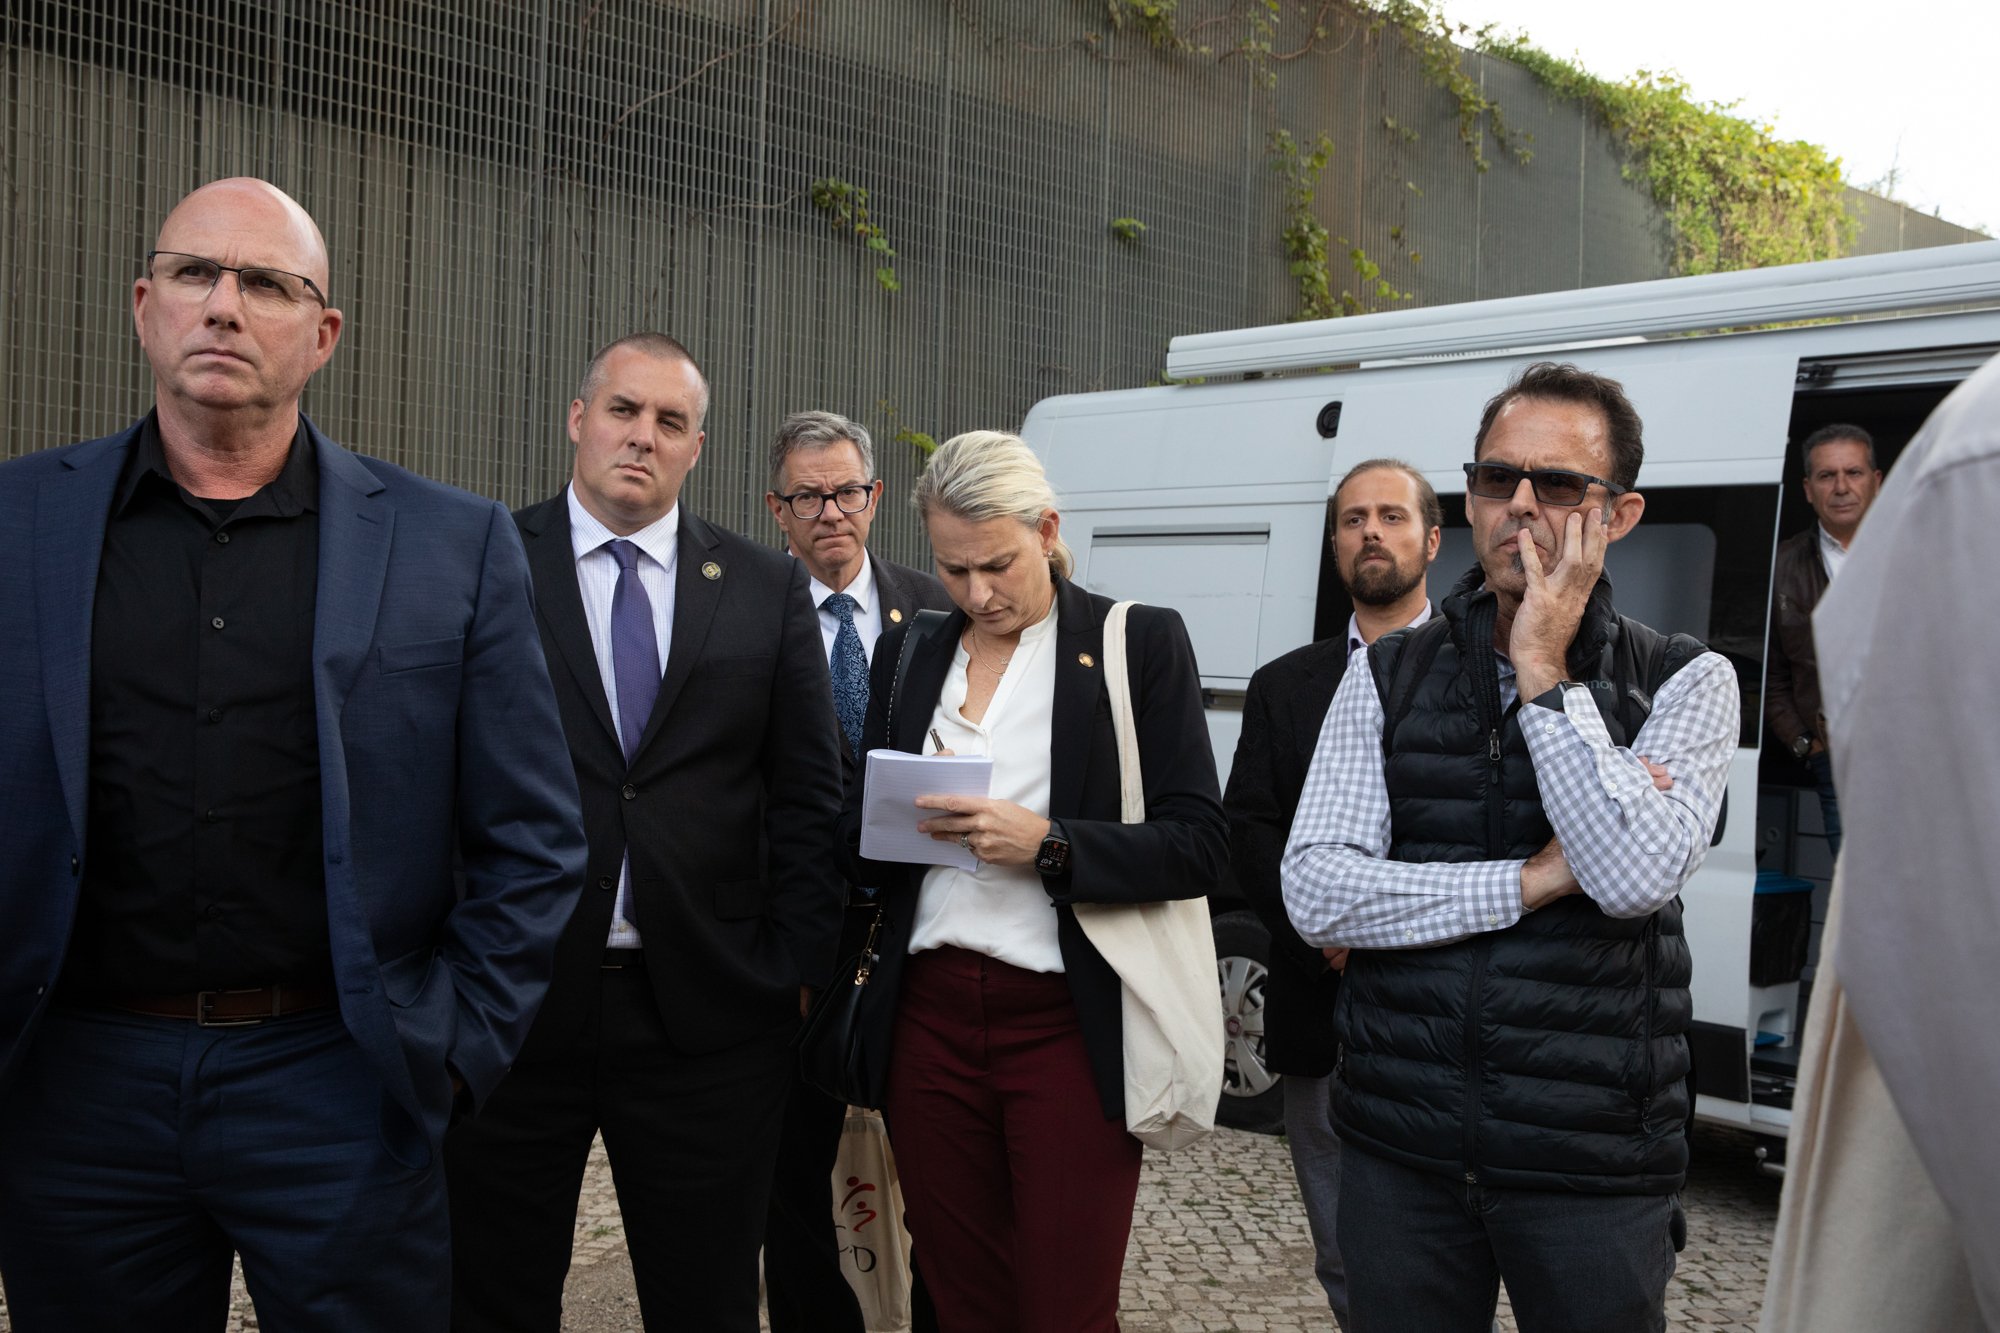  A delegation of about two dozen Oregonians, including lawmakers, treatment providers, police and policy advisers, visited a mobile methadone treatment program in Avenida de Ceuta, Lisbon. October, 27, 2023 